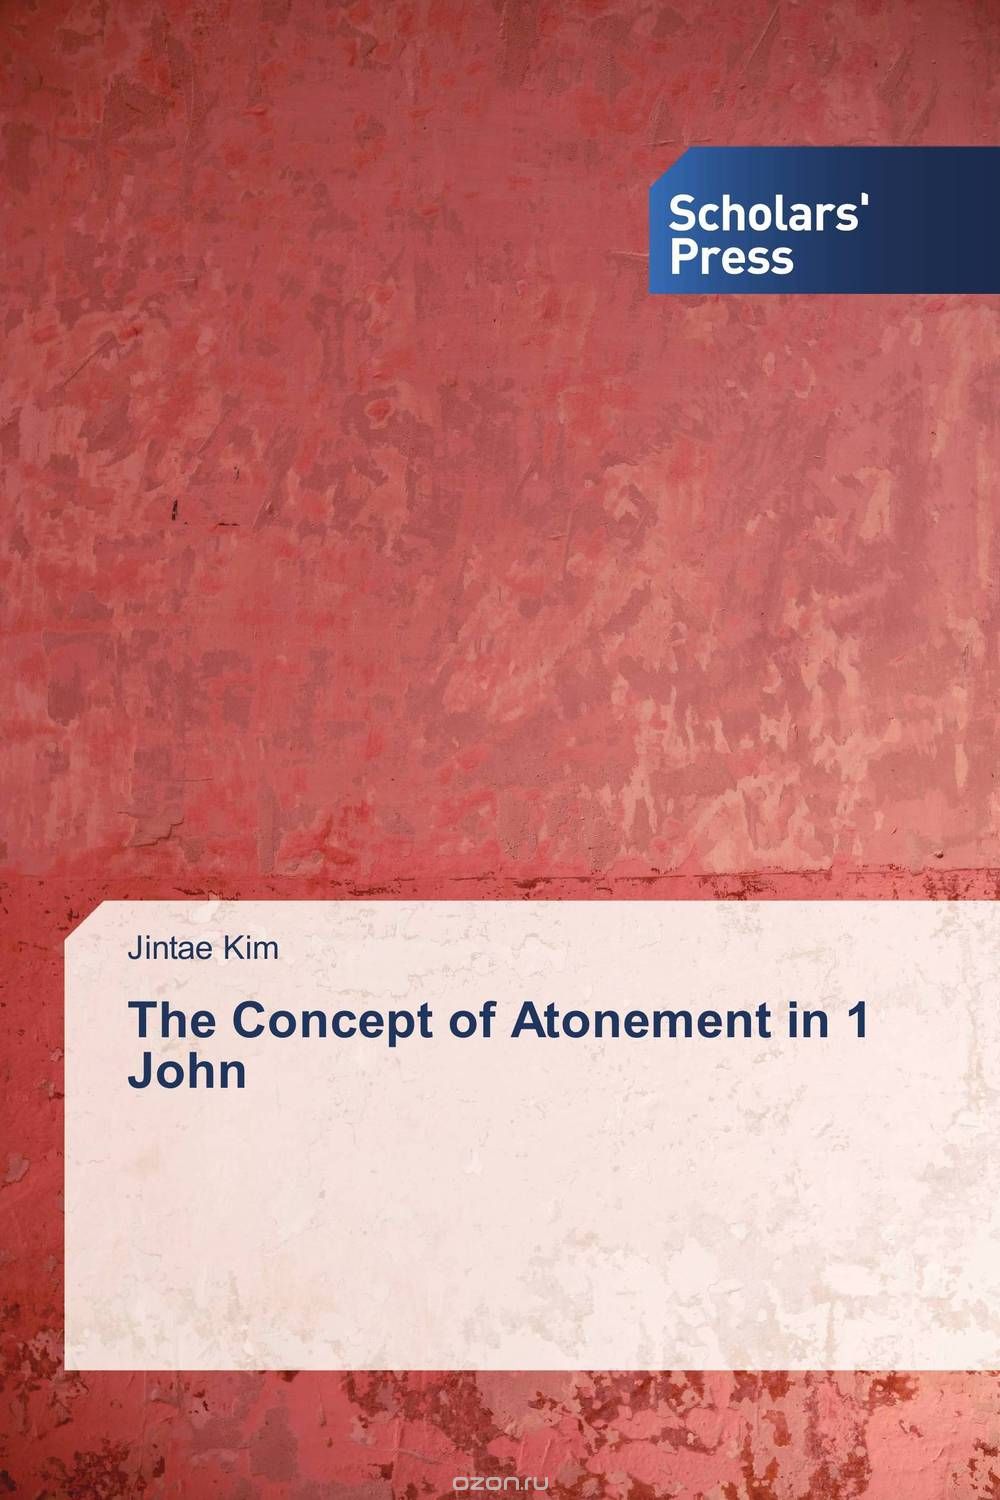 The Concept of Atonement in 1 John